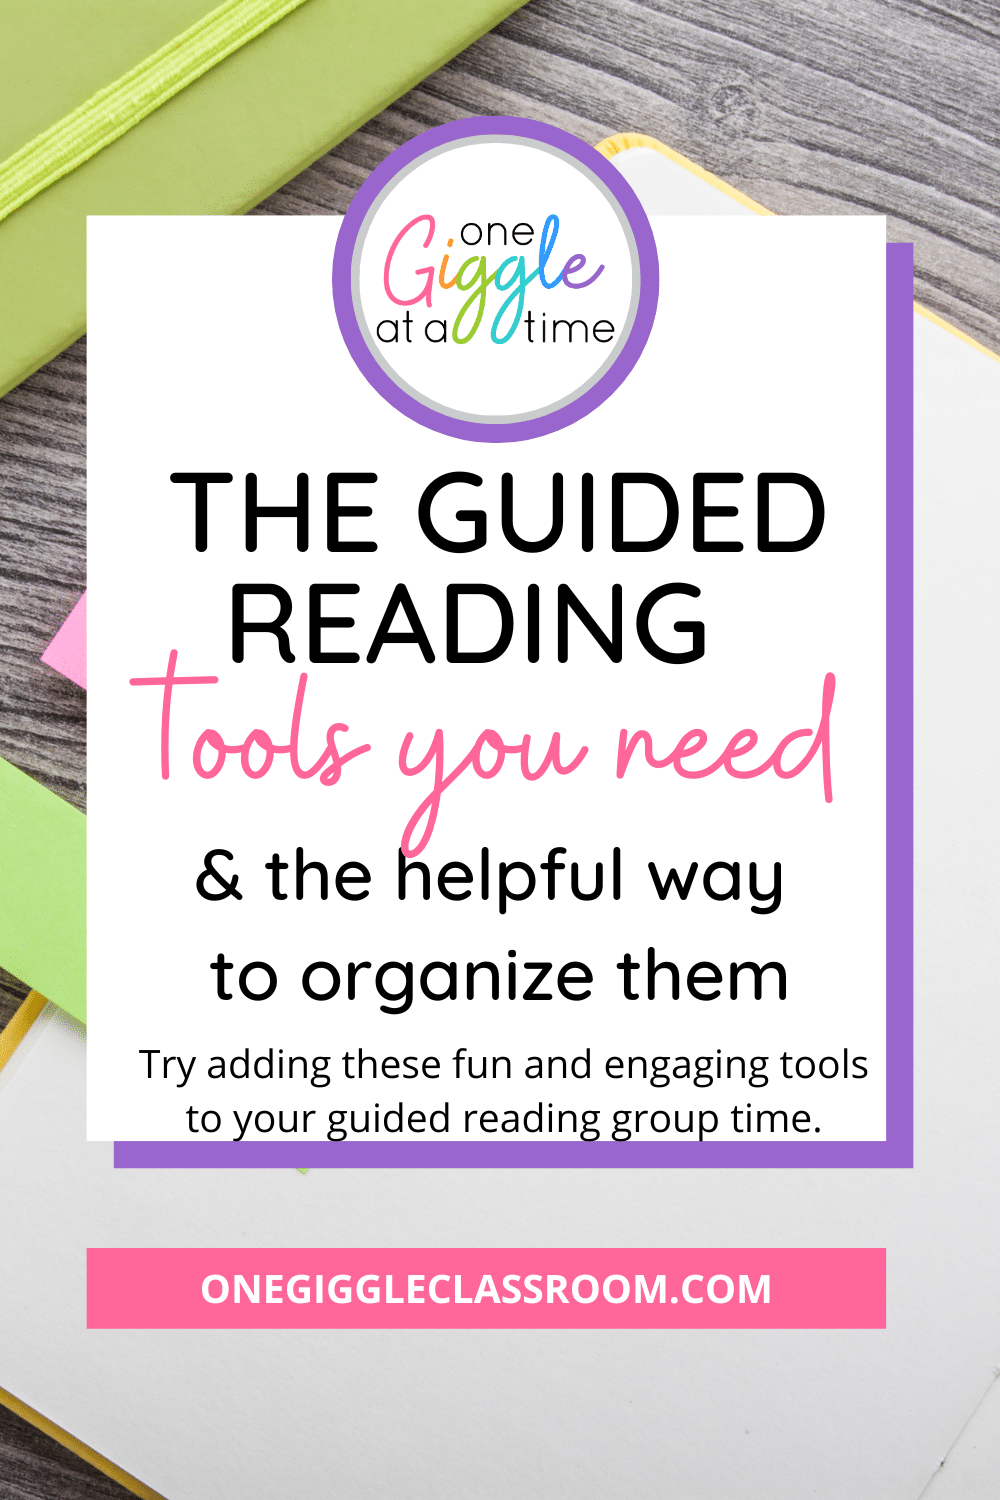 The Guided Reading Tools You Need & the Helpful Way to Organize Them